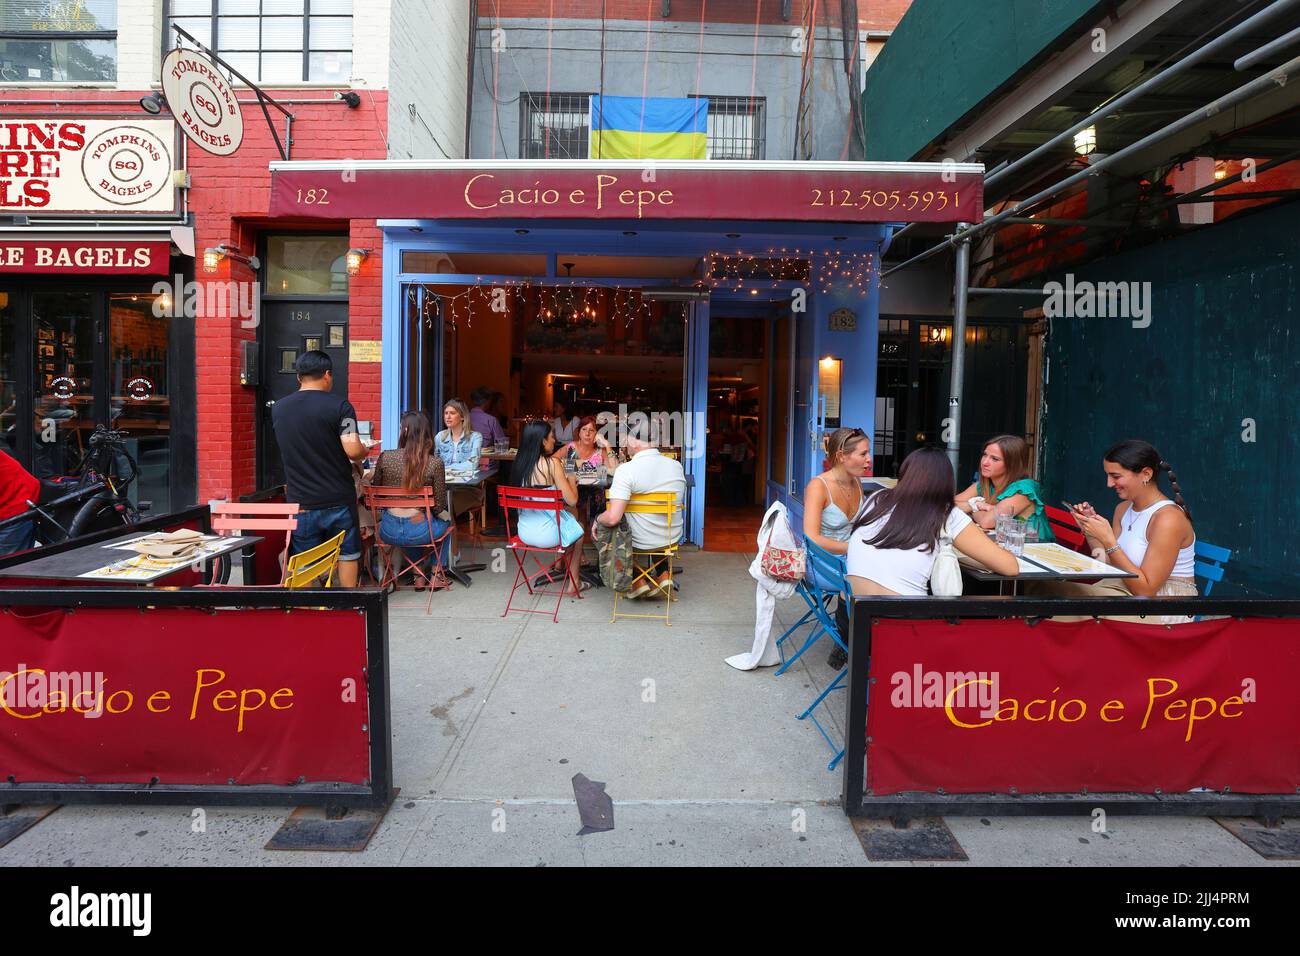 Cacio e Pepe, 182 2nd Ave, New York, NY. exterior storefront of an Italian restaurant in the East Village neighborhood in Manhattan. Stock Photo